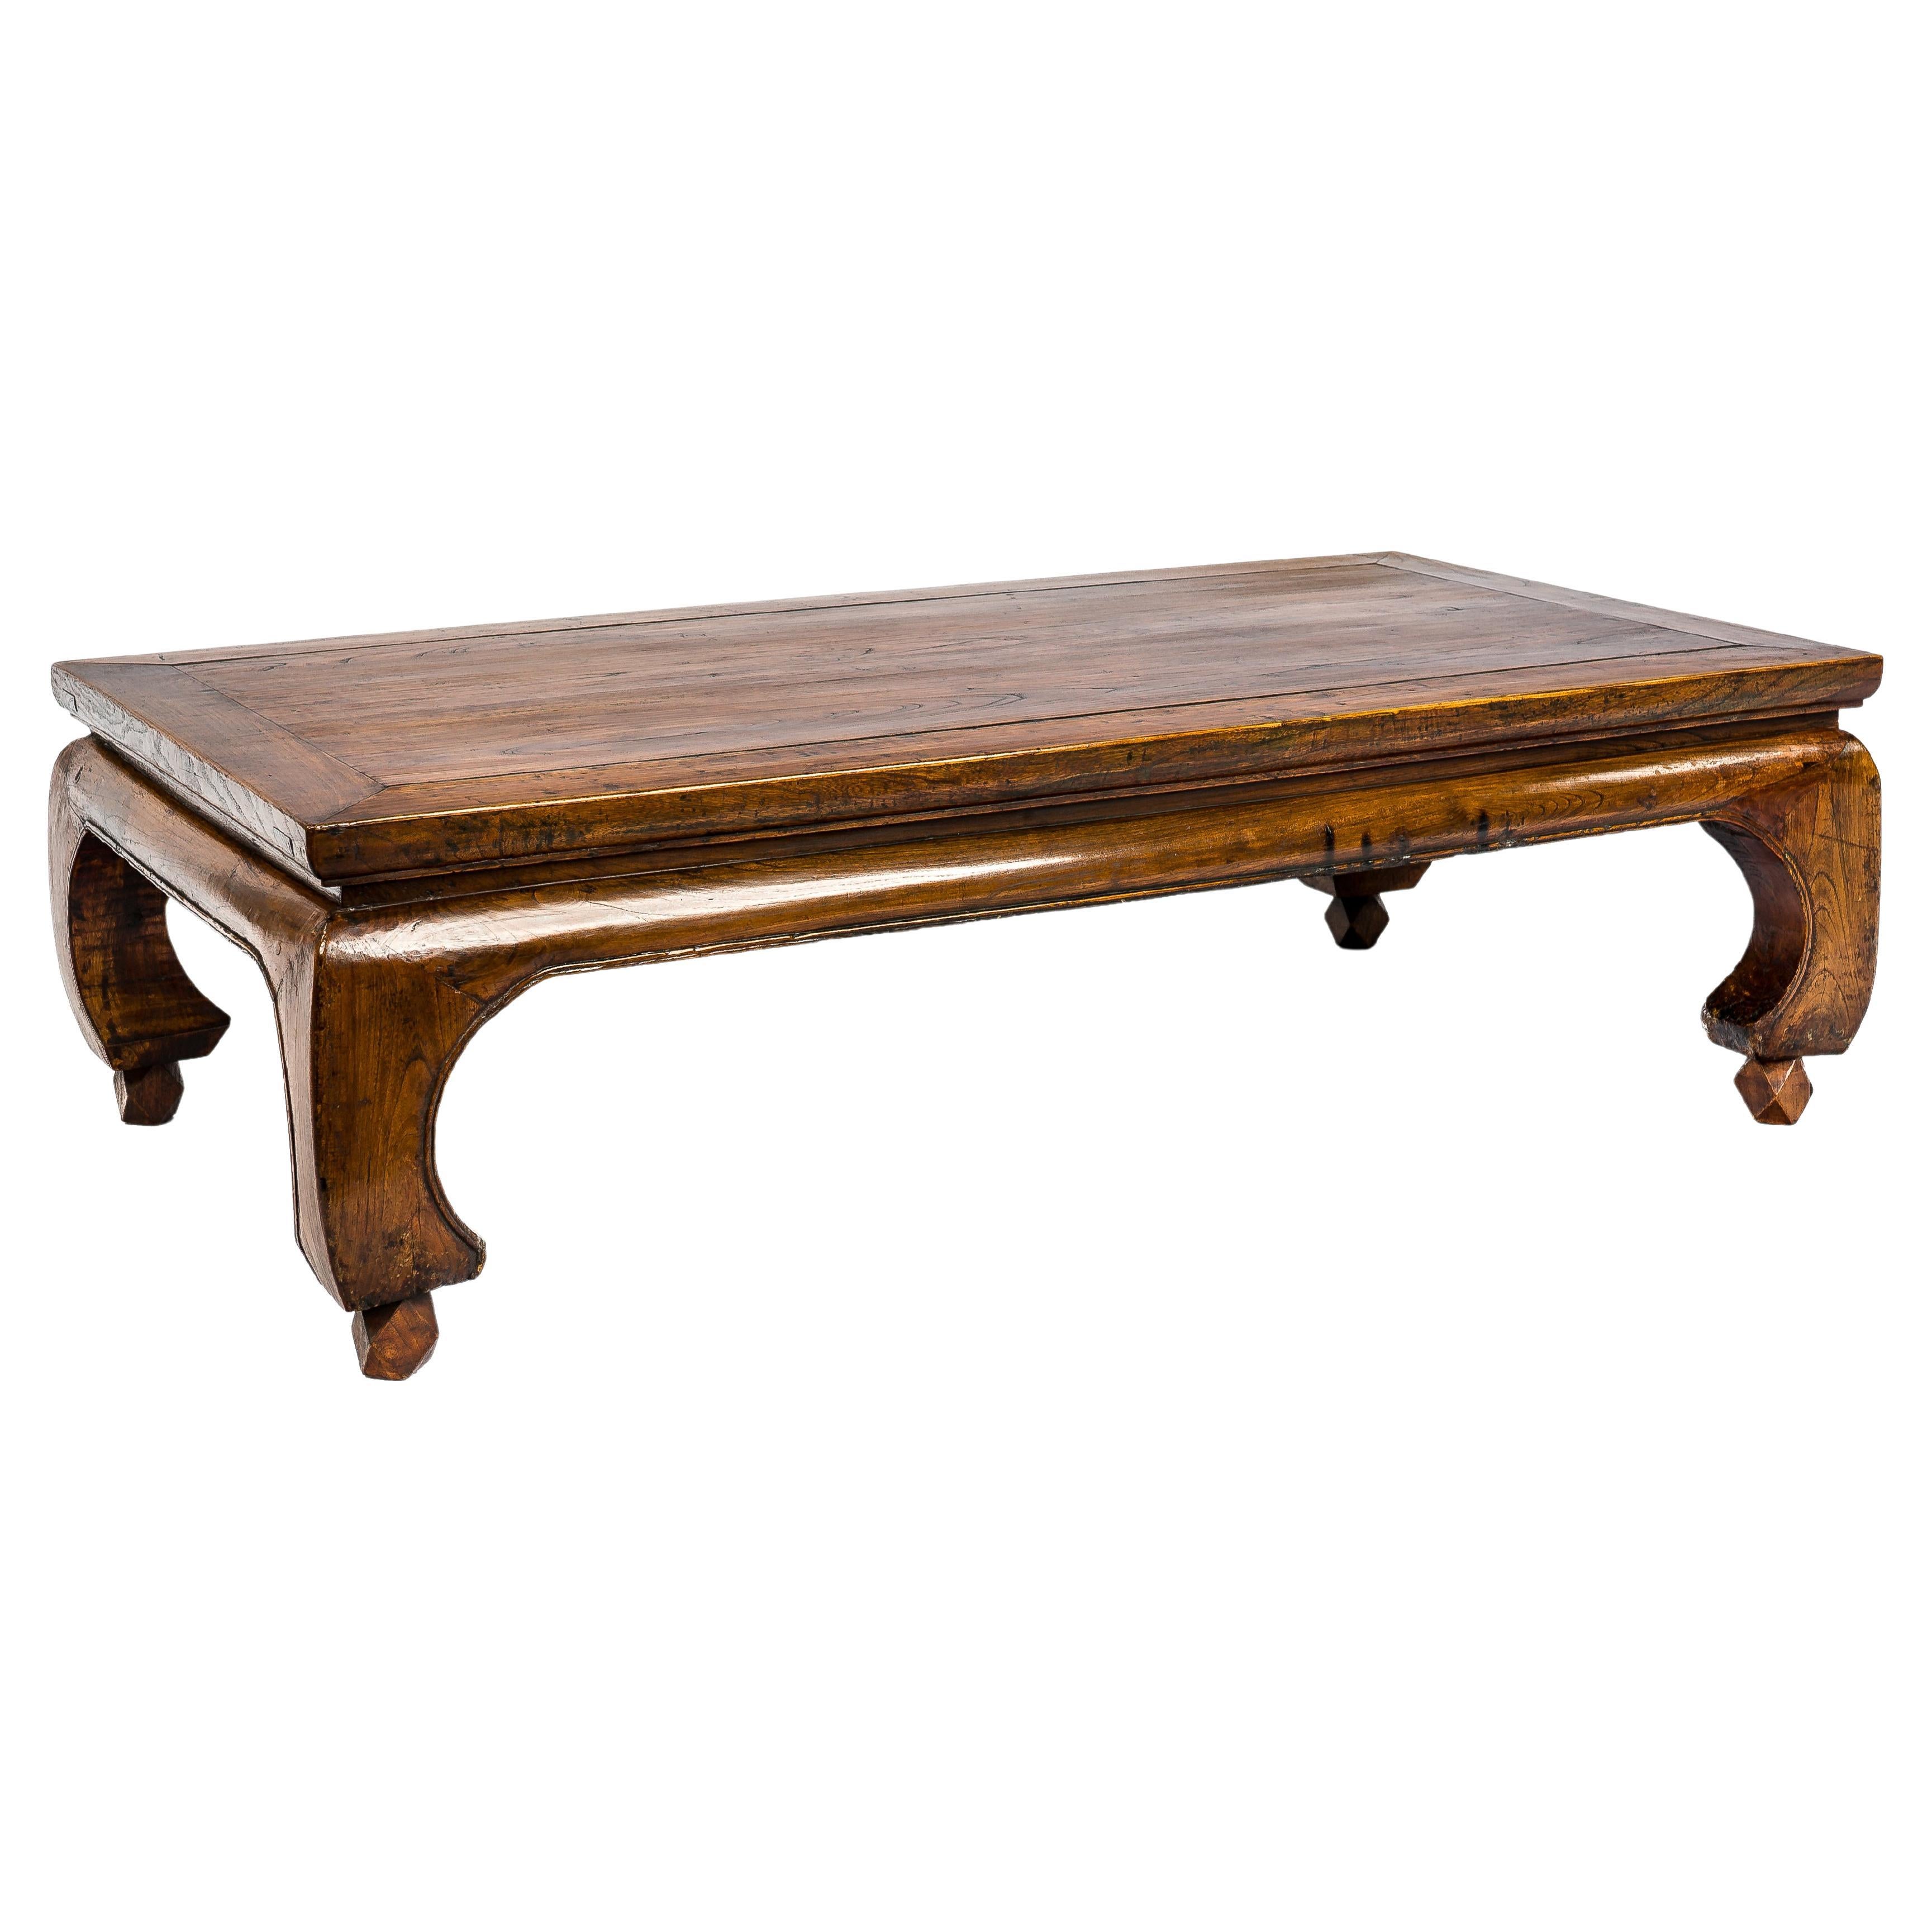 it ® Coffee Table Low Celestial Chinese Etnicart 27x27x27-High Quality 